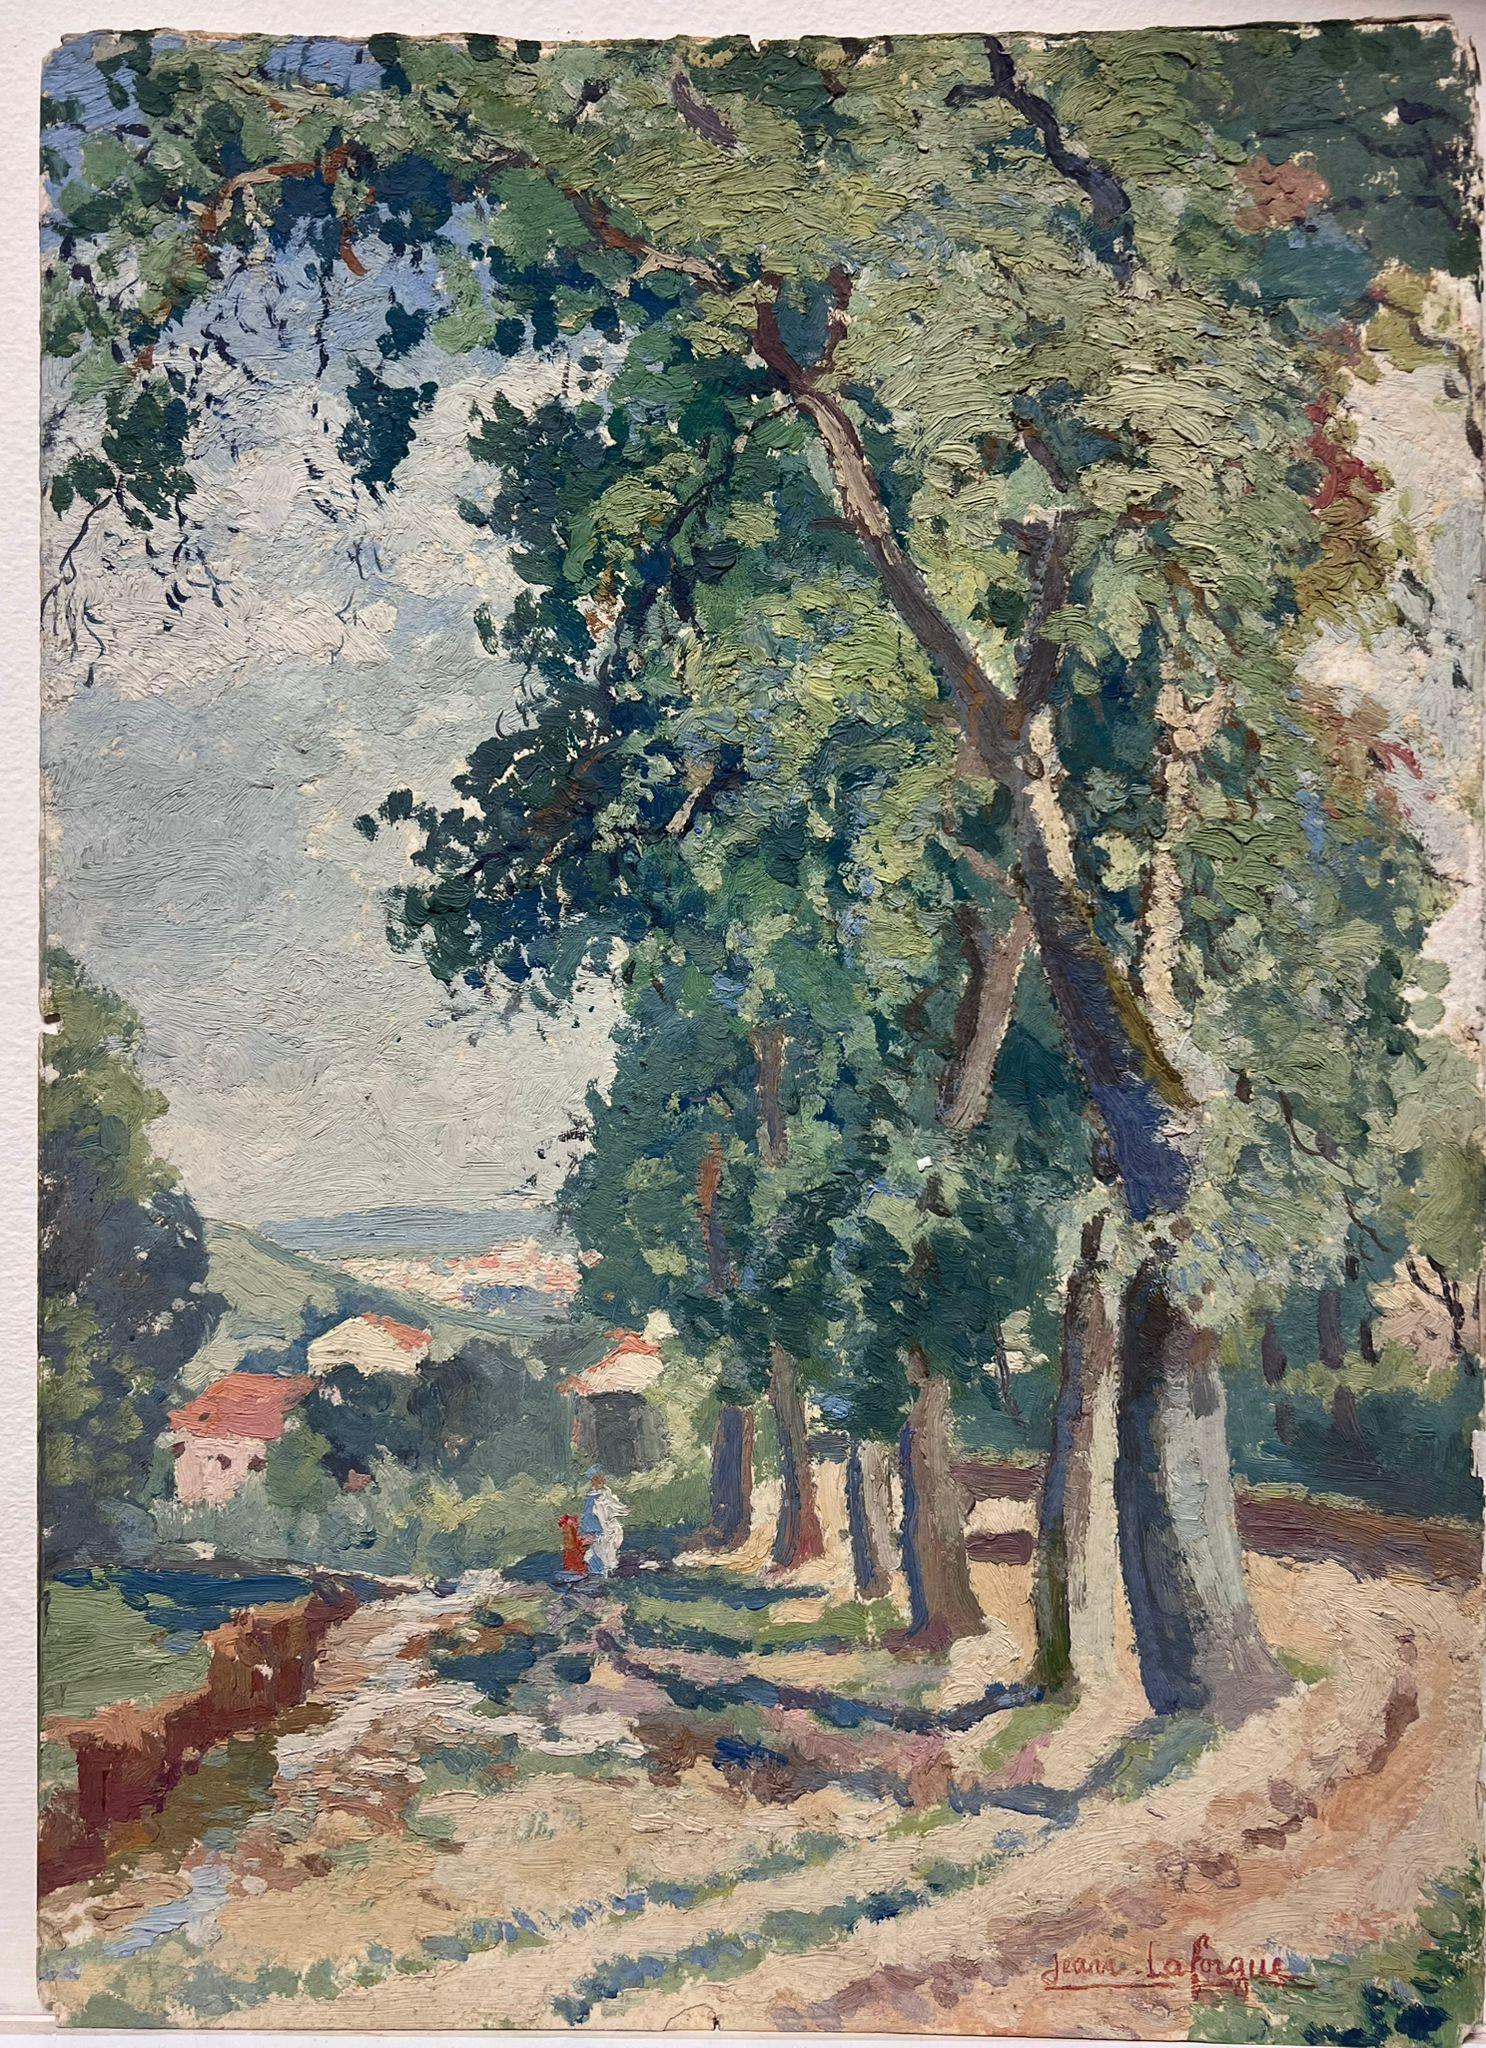 Jean La Forgue (French 1901-1975)
signed oil on thick card, unframed
painting: 18 x 13 inches
provenance: the artists estate, France
condition: very good and sound condition; there are minor age related marks and stains to the surface simply caused